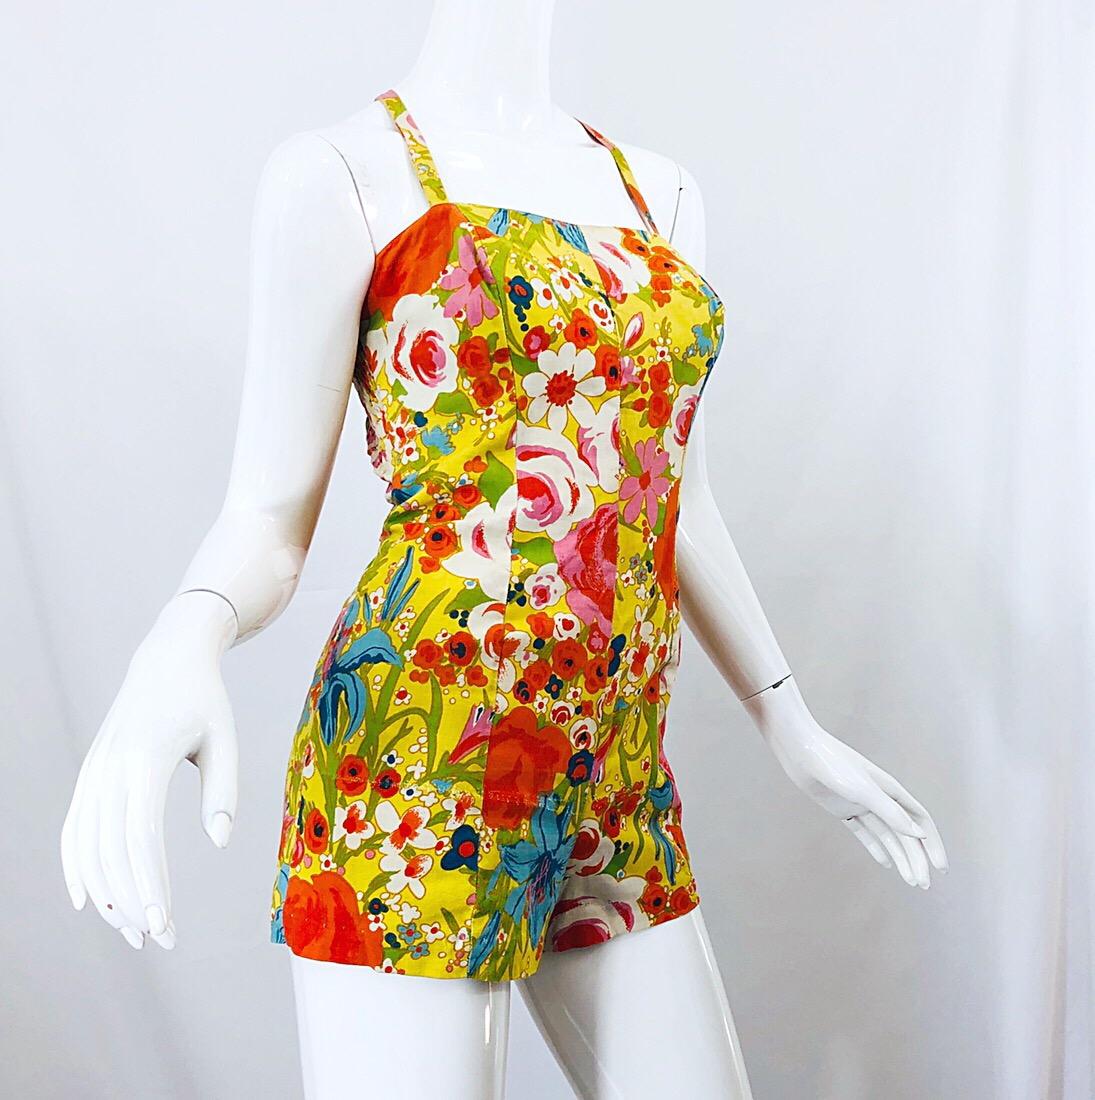 1960s Tina Leser Mod One Piece Vintage Playsuit Romper 60s Swimsuit Flowers In Excellent Condition For Sale In San Diego, CA